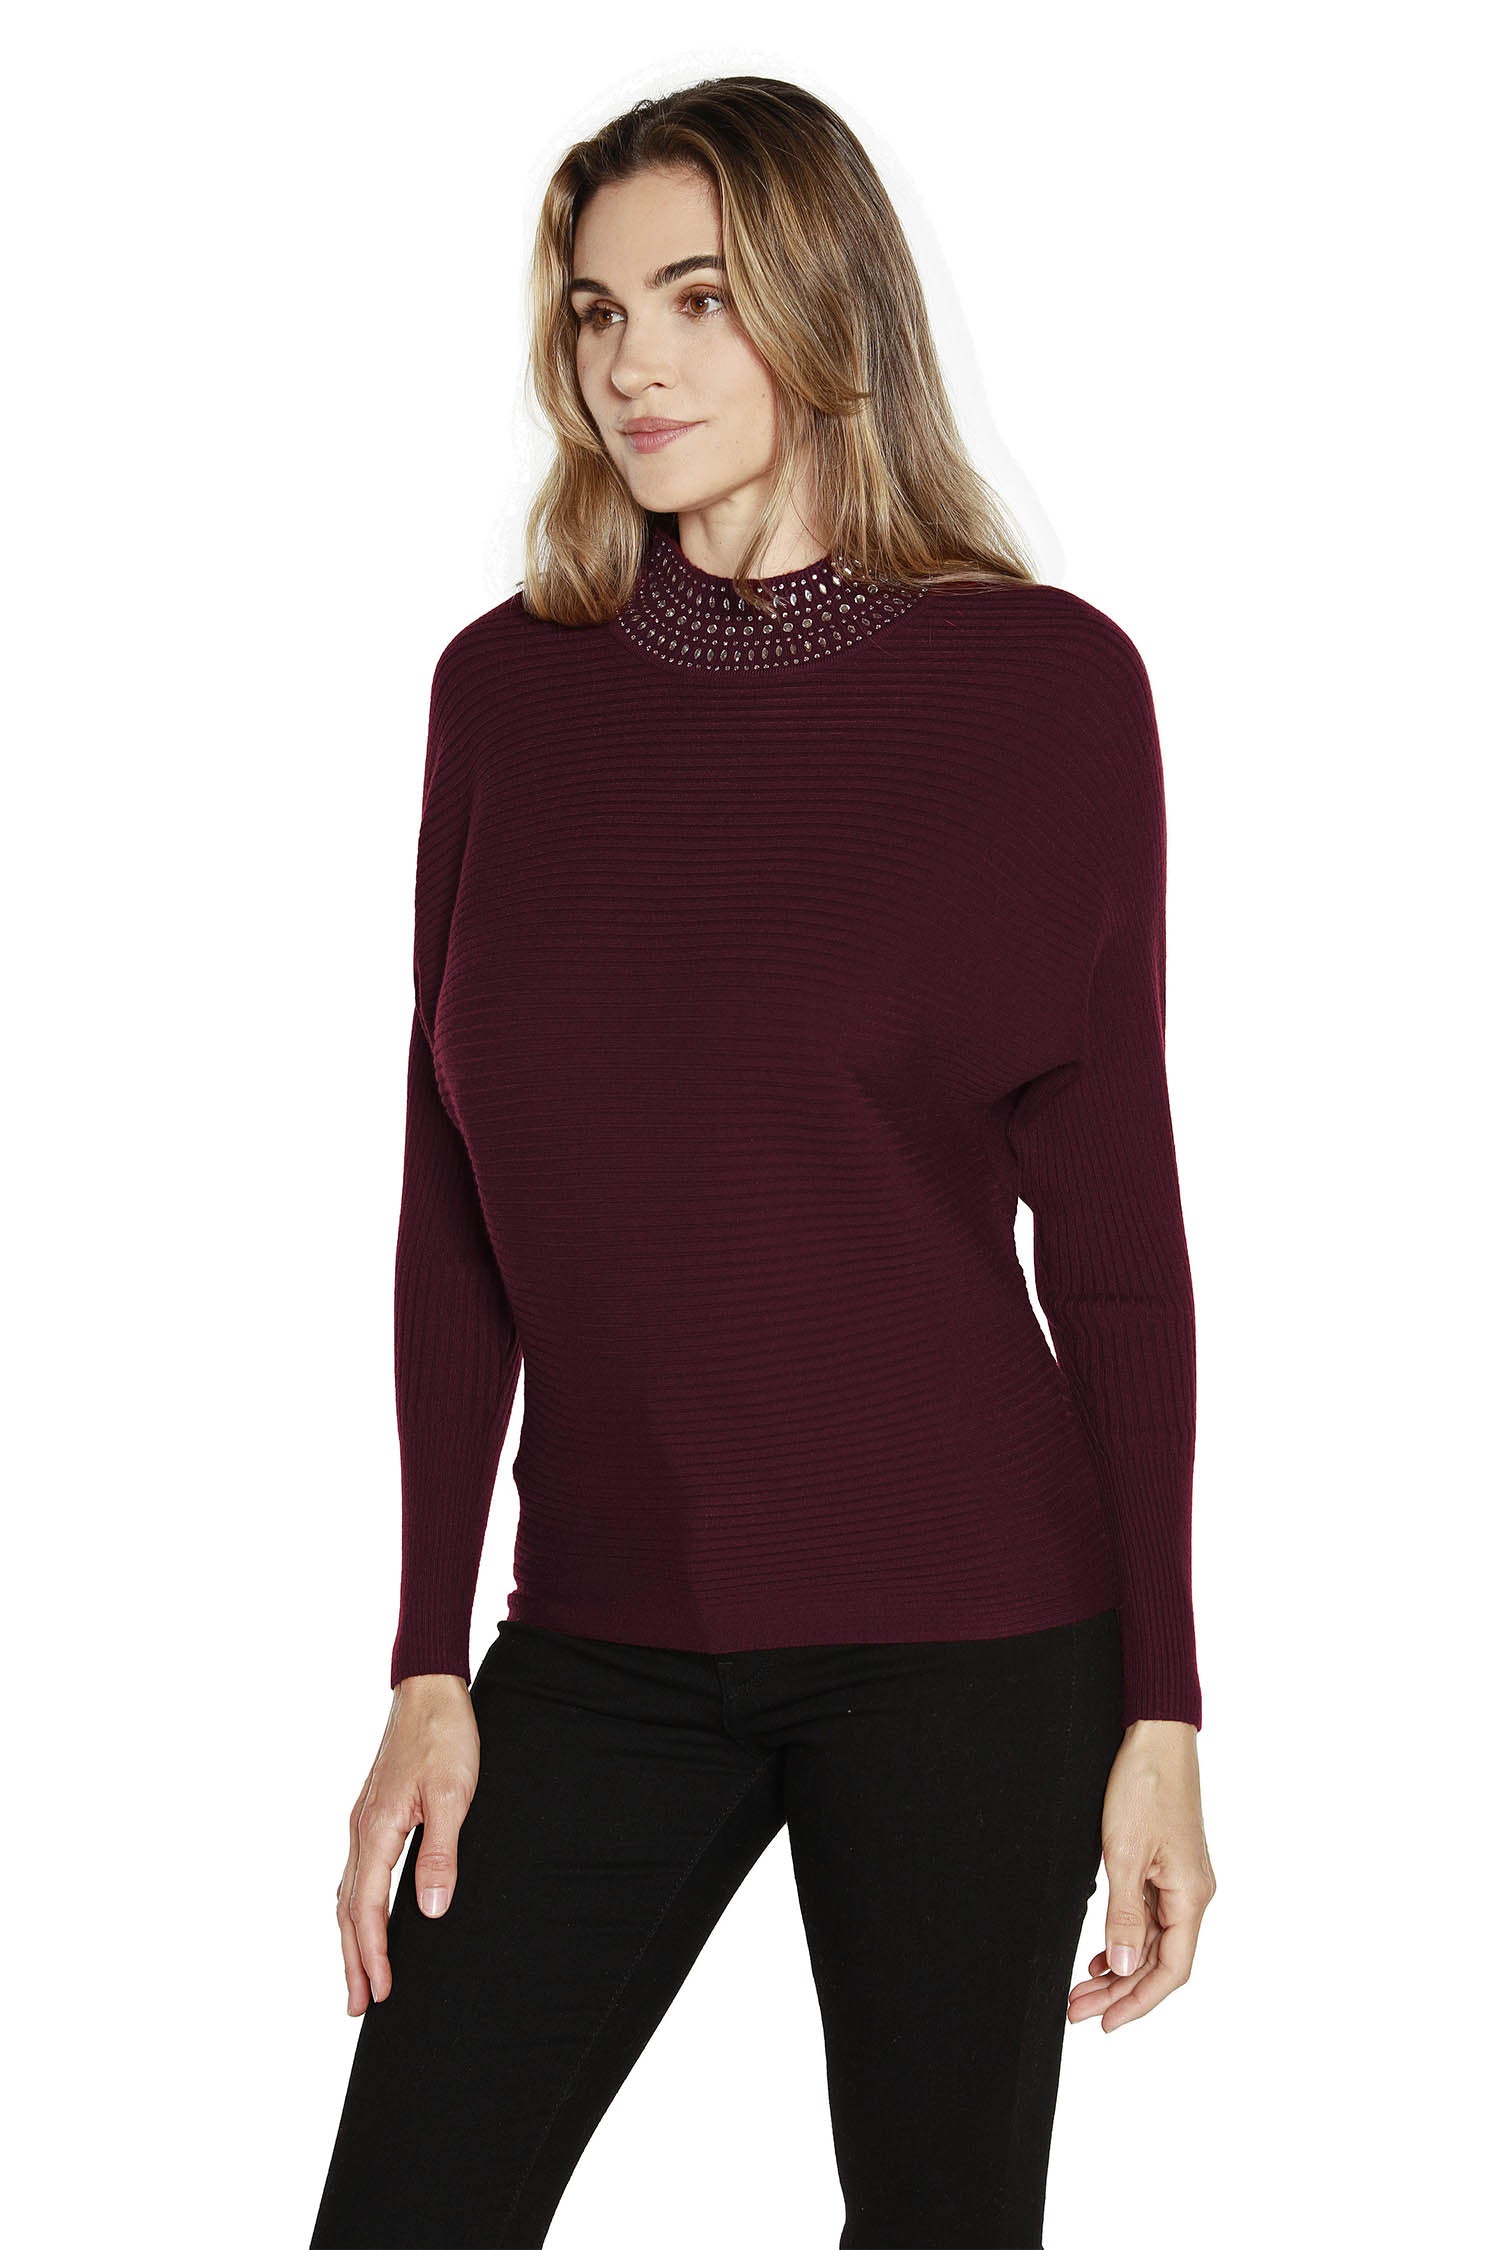 Women's Long Sleeve Sweater in a Ribbed Knit with Dolman Sleeves and Rhinestone Detailed Mock Neck